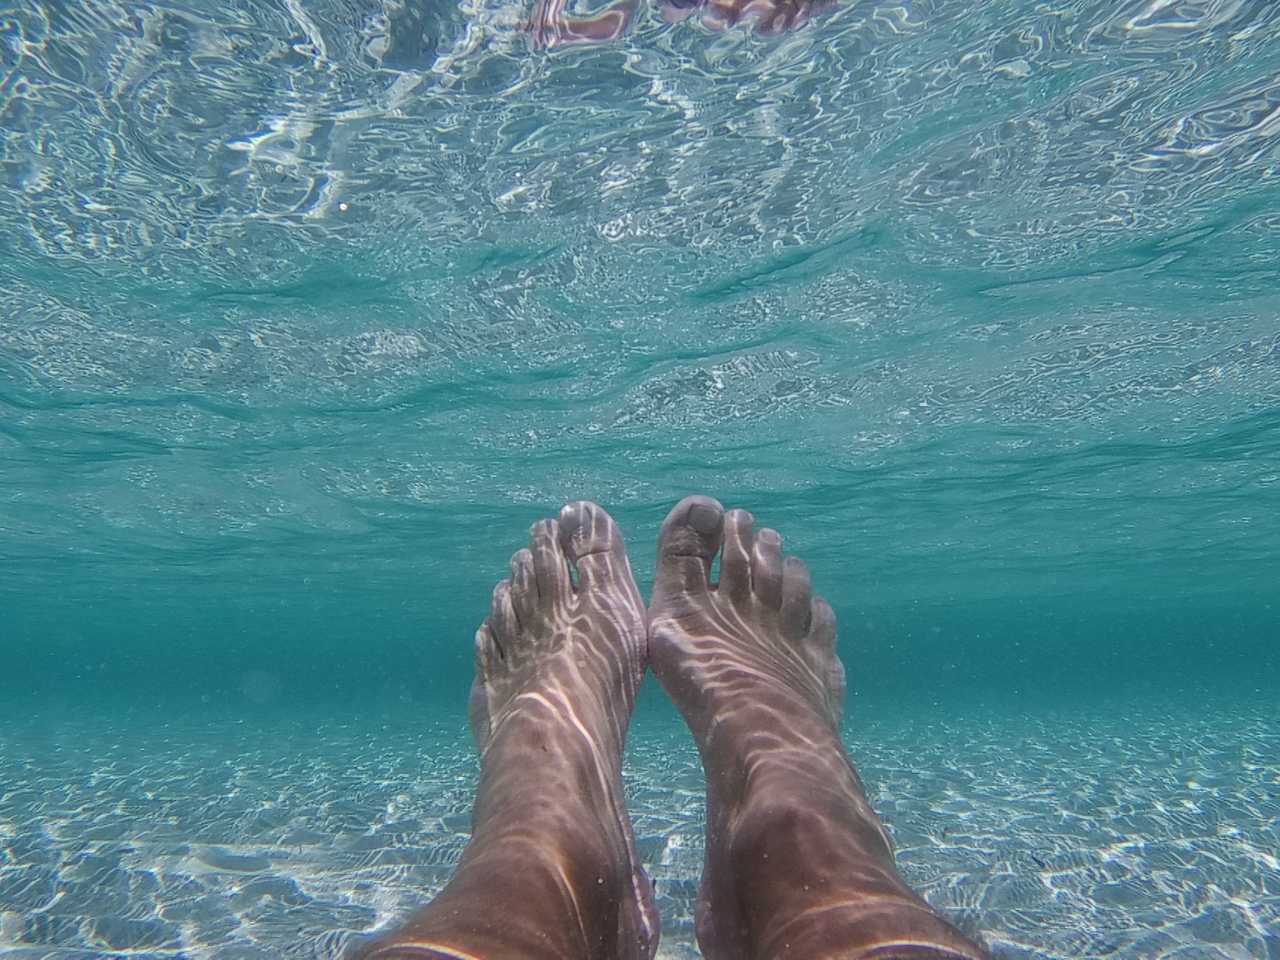 Clear blue water polluted by Iain’s toes.